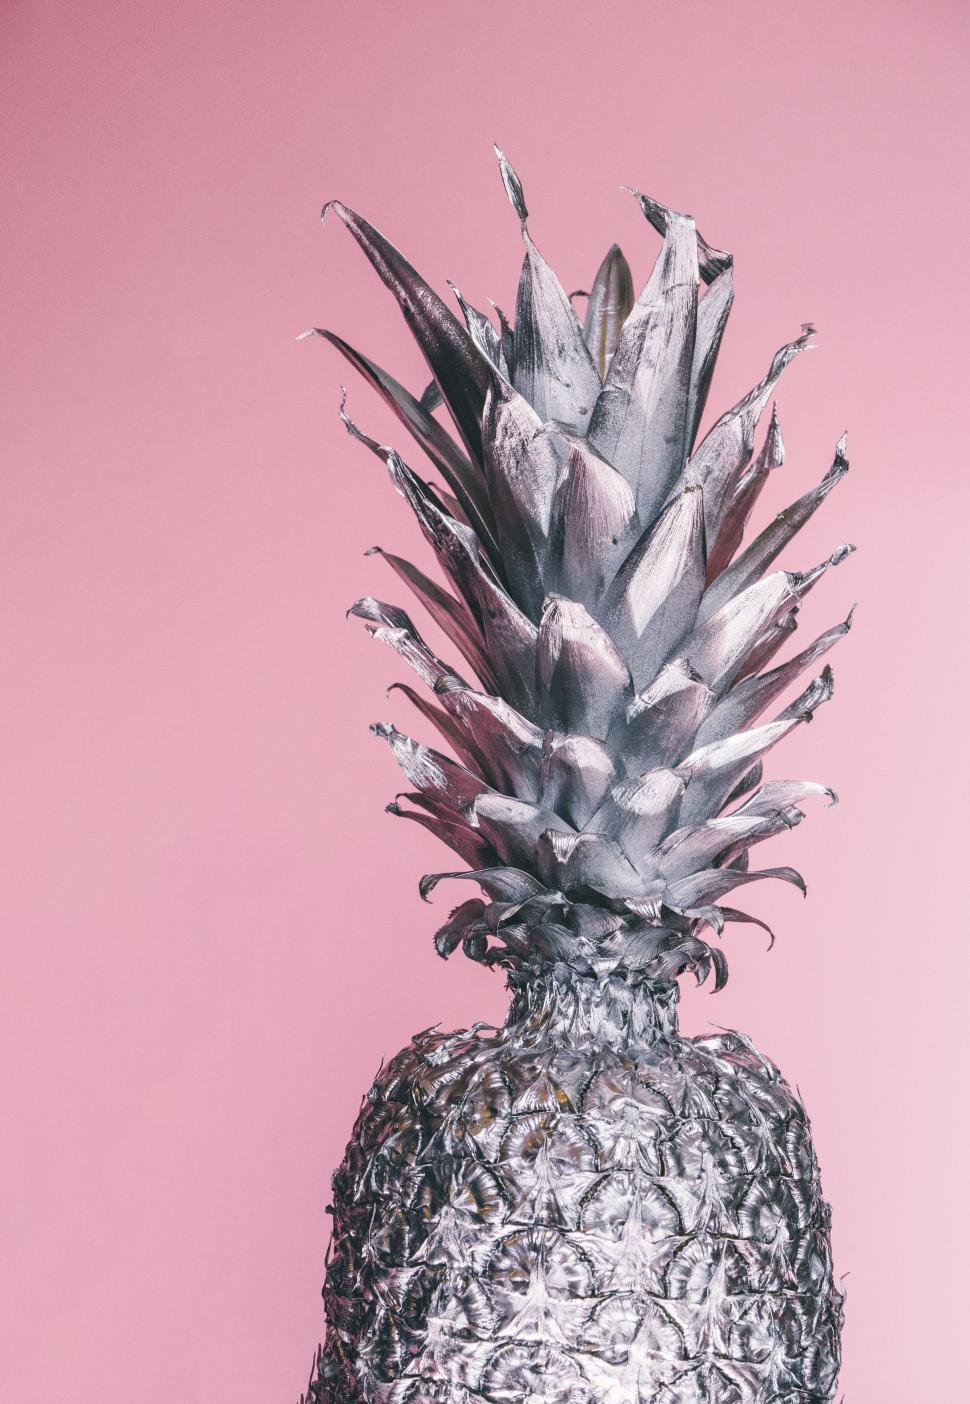 Free Image of Black and White Pineapple 